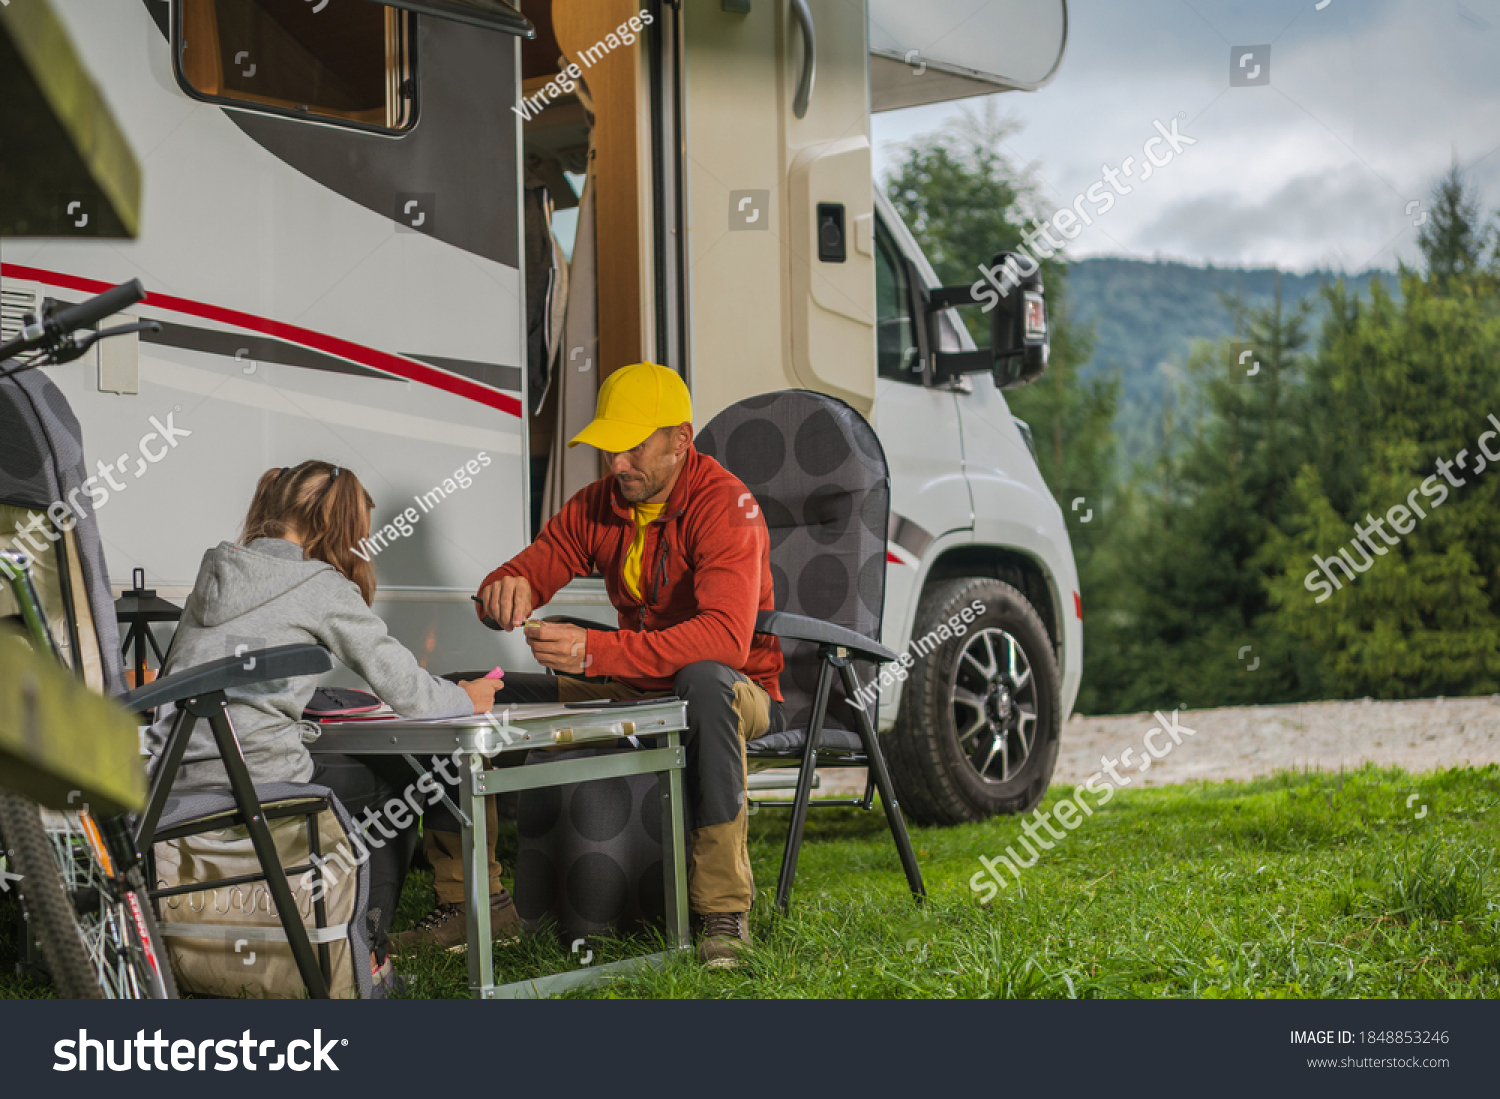 Caucasian Father with His Daughter Hanging Next to Modern Camper Van Class C Motorhome. Family RV Park Camping Theme. #1848853246